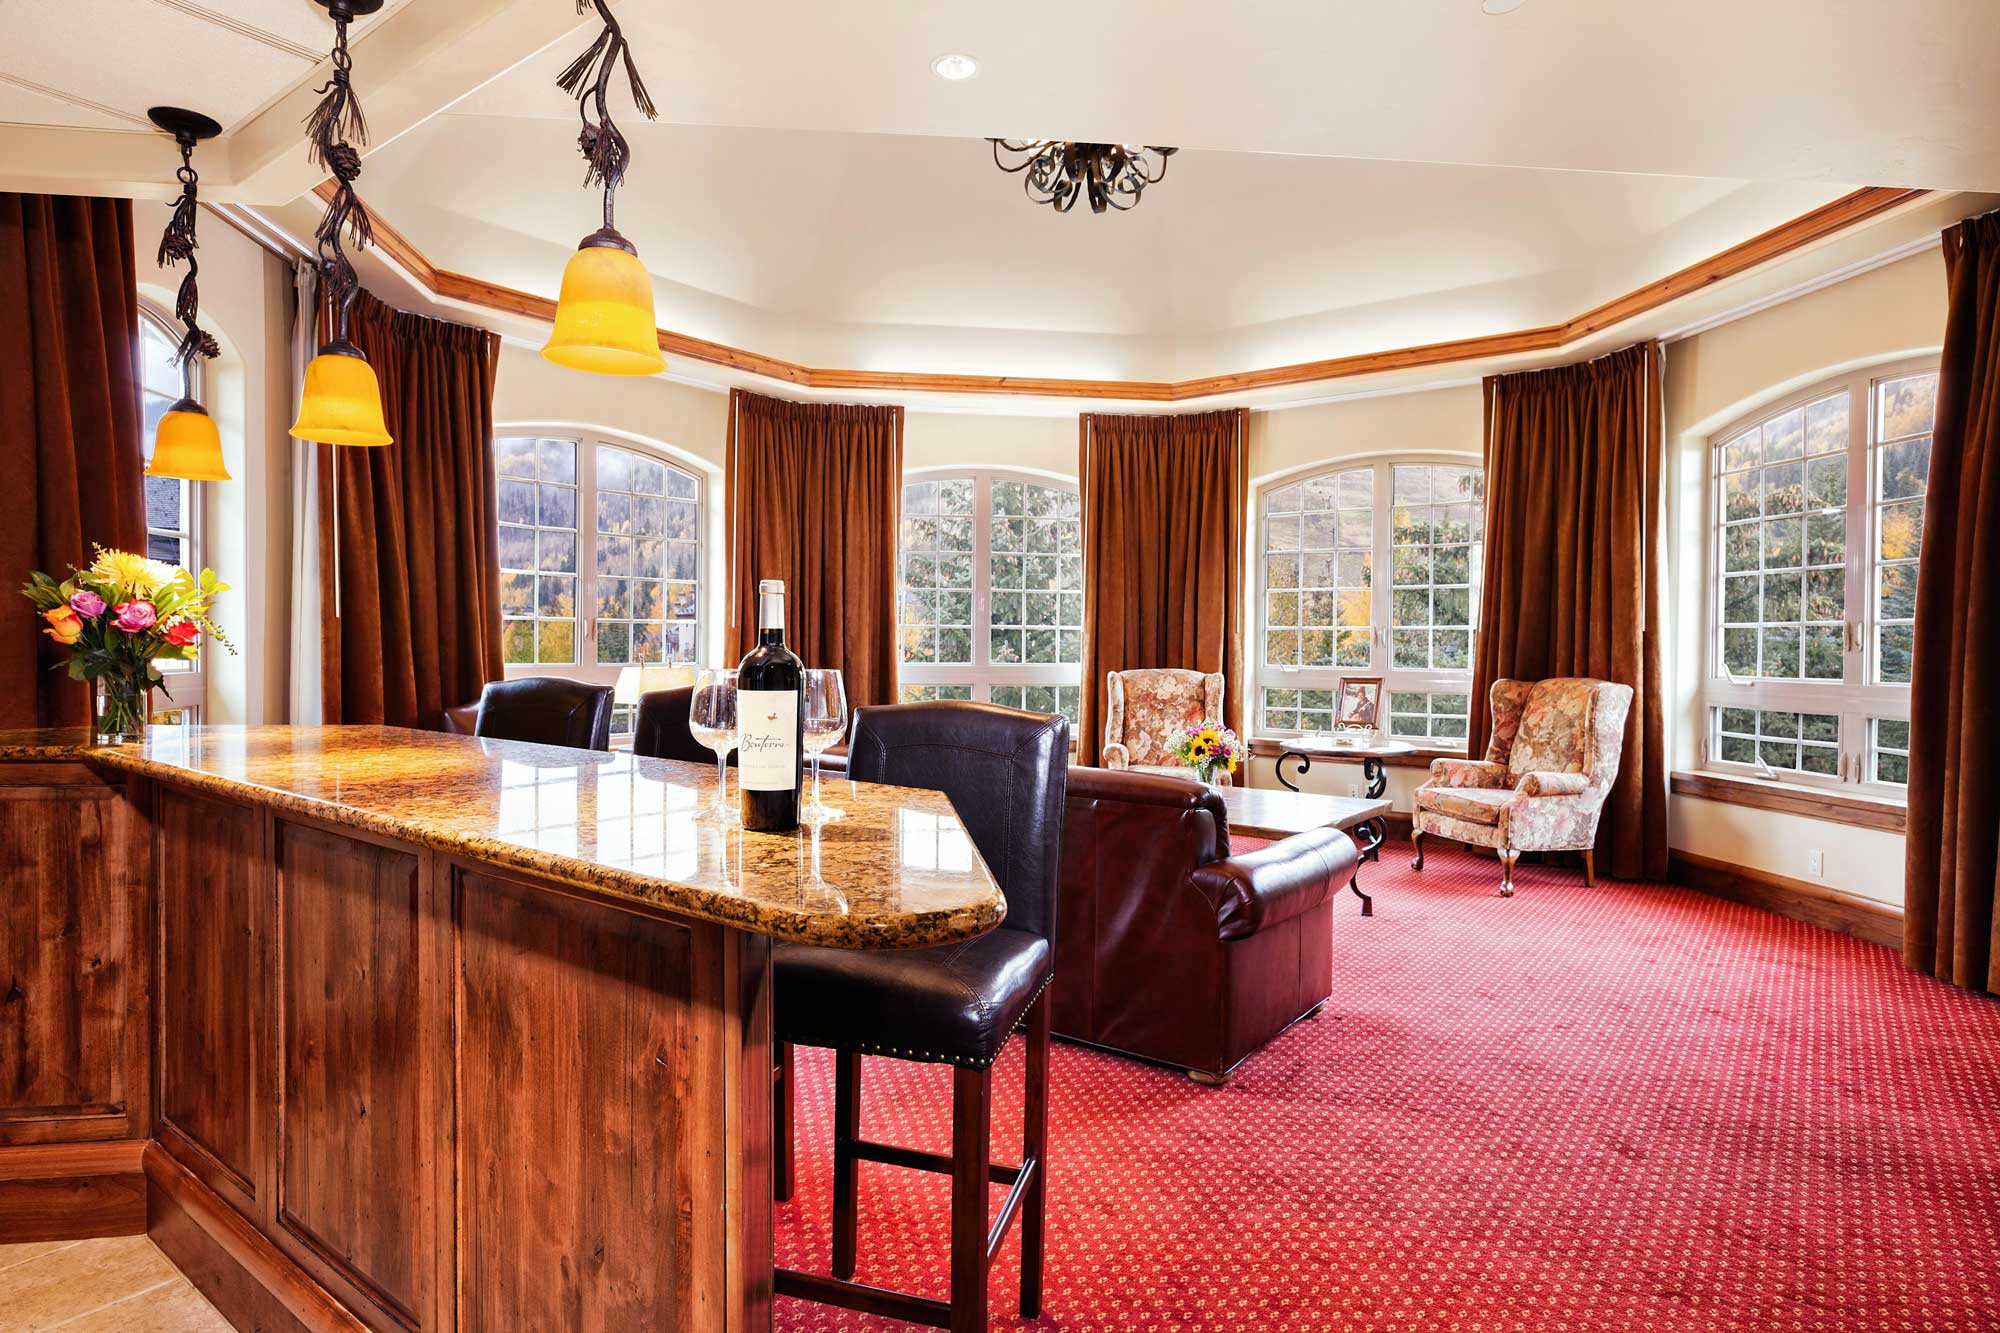 Seibert suite offers updated furnishings and kitchen Tivoli Lodge Vail Colorado